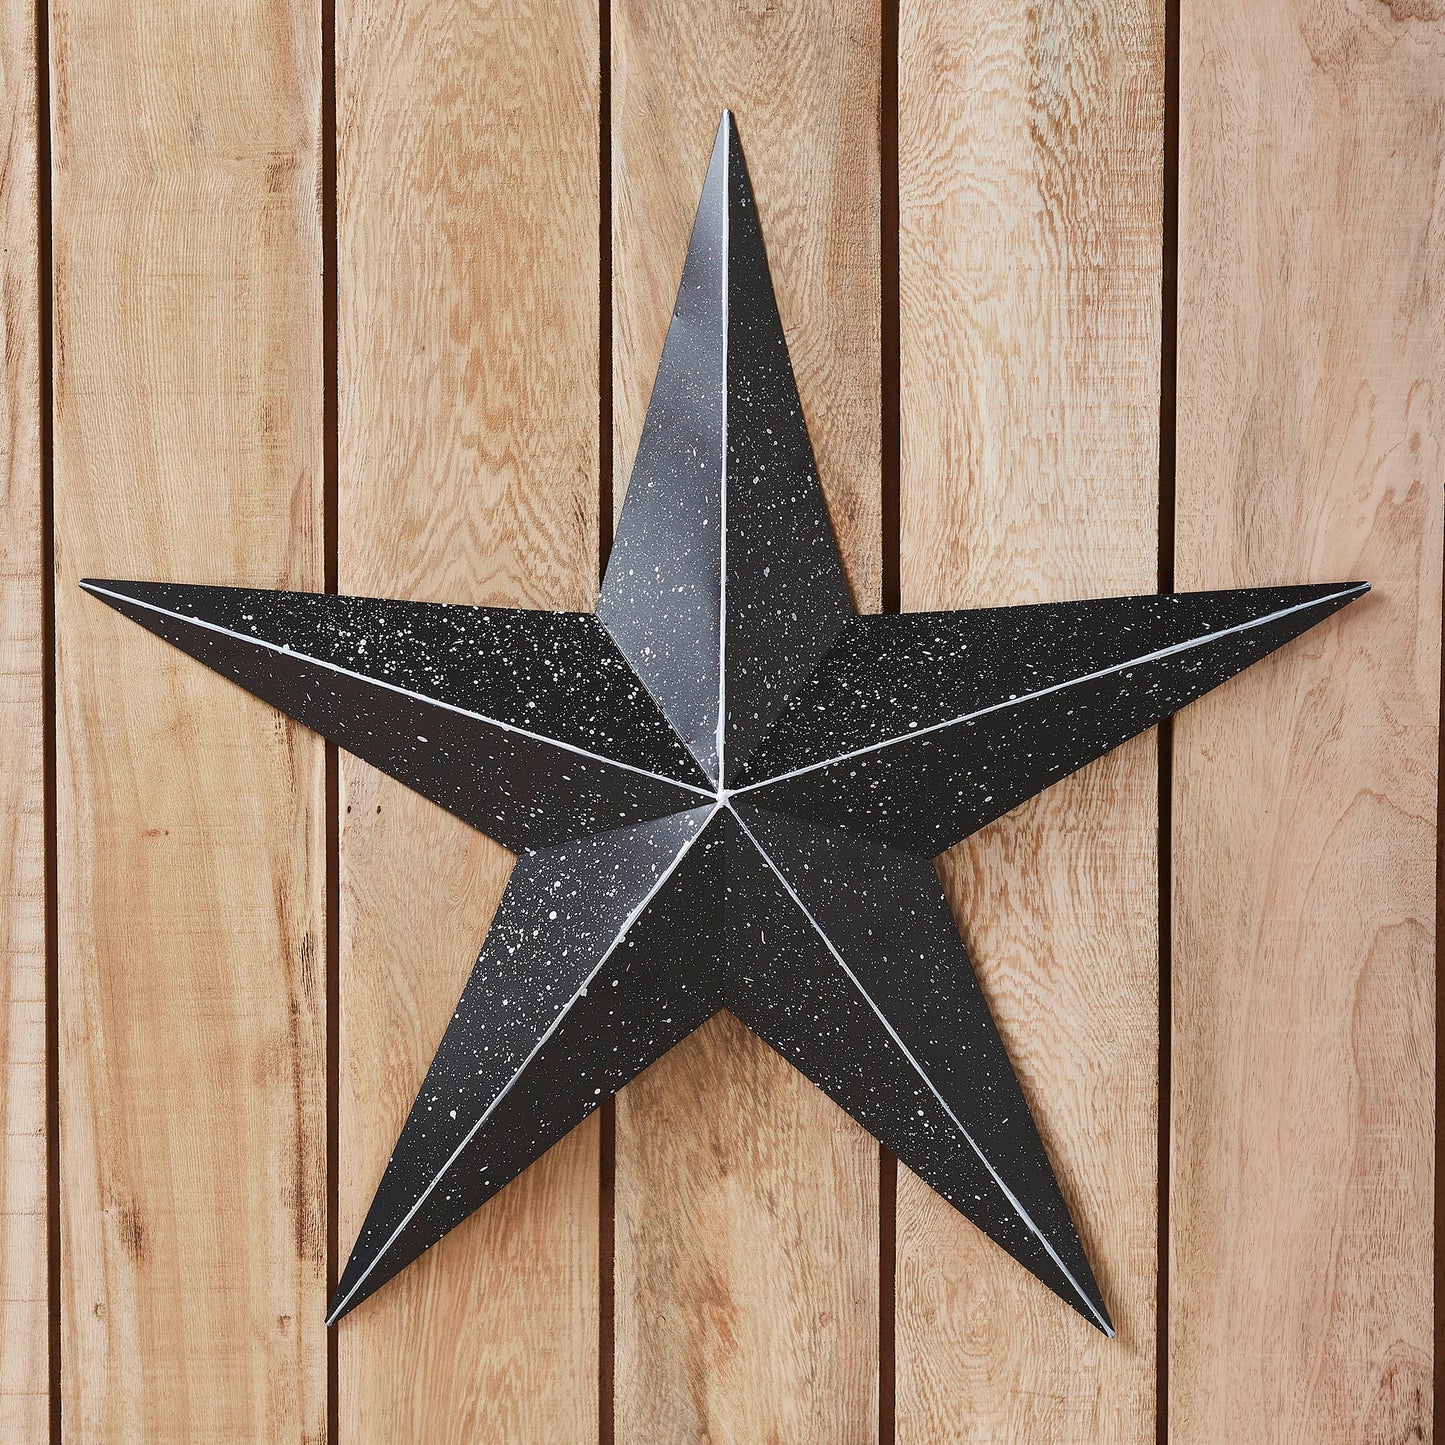 VHC Brands Patriotic Faceted Metal Star Black Wall Hanging 24x24, Independence Day Decor, American Star Design, Distressed Appearance Metal Wall Hanging,  Star Shape, Country, Charcoal Black